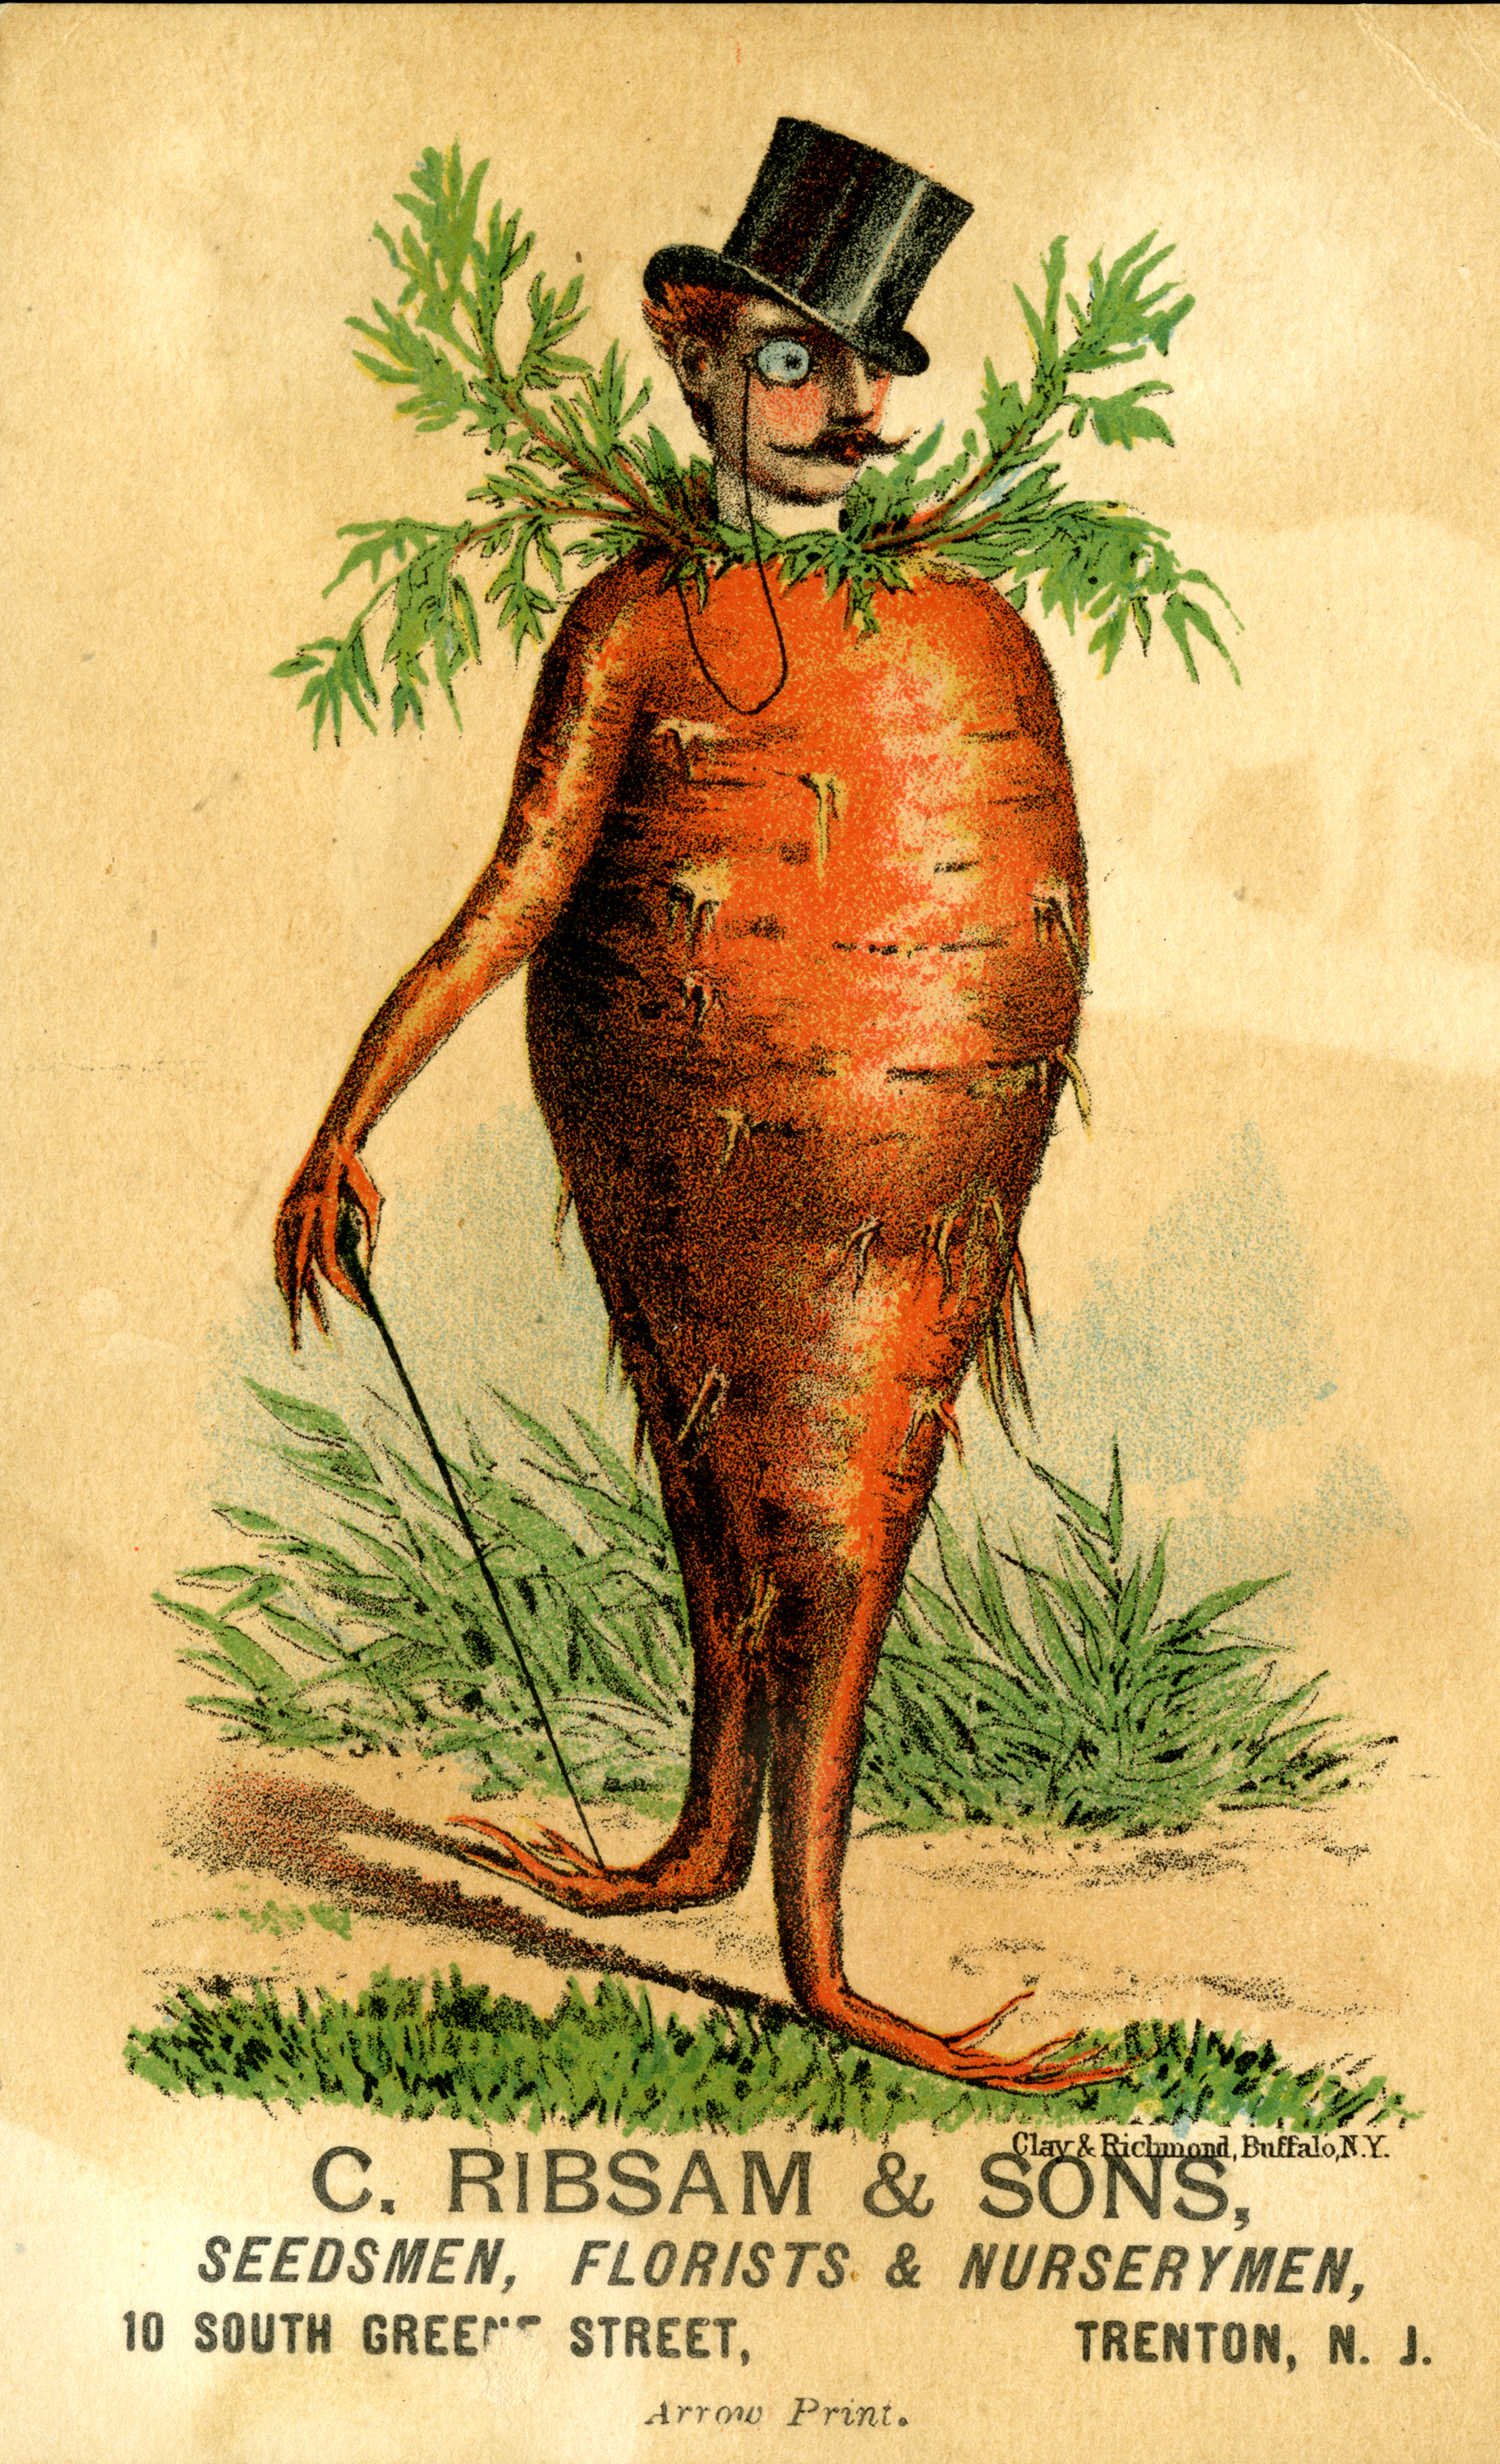 Seed catalog ad showing carrot with top hat and cane